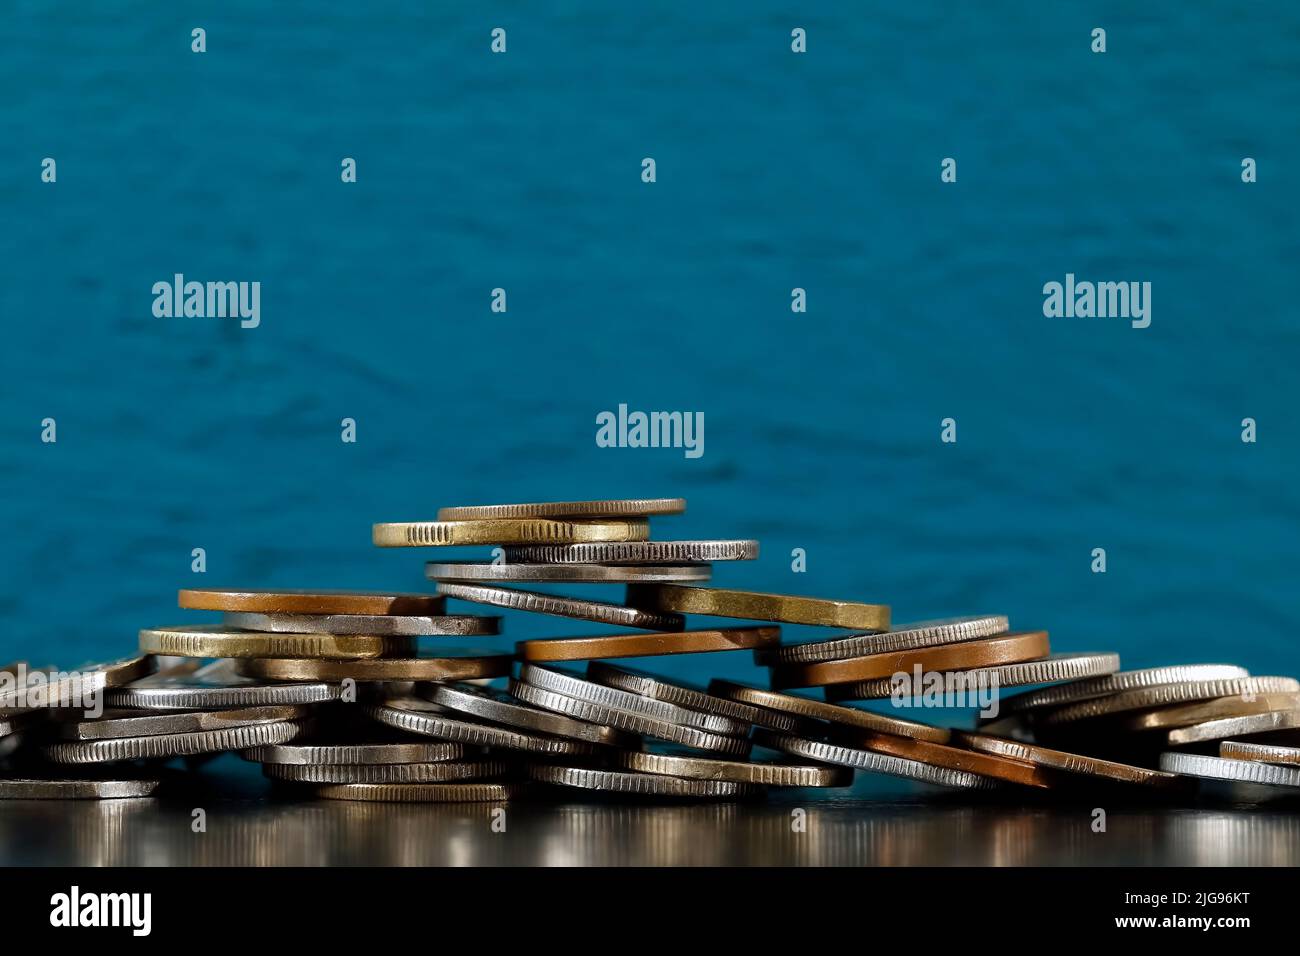 The image of money, in this case coins, express financial instability. Stock Photo